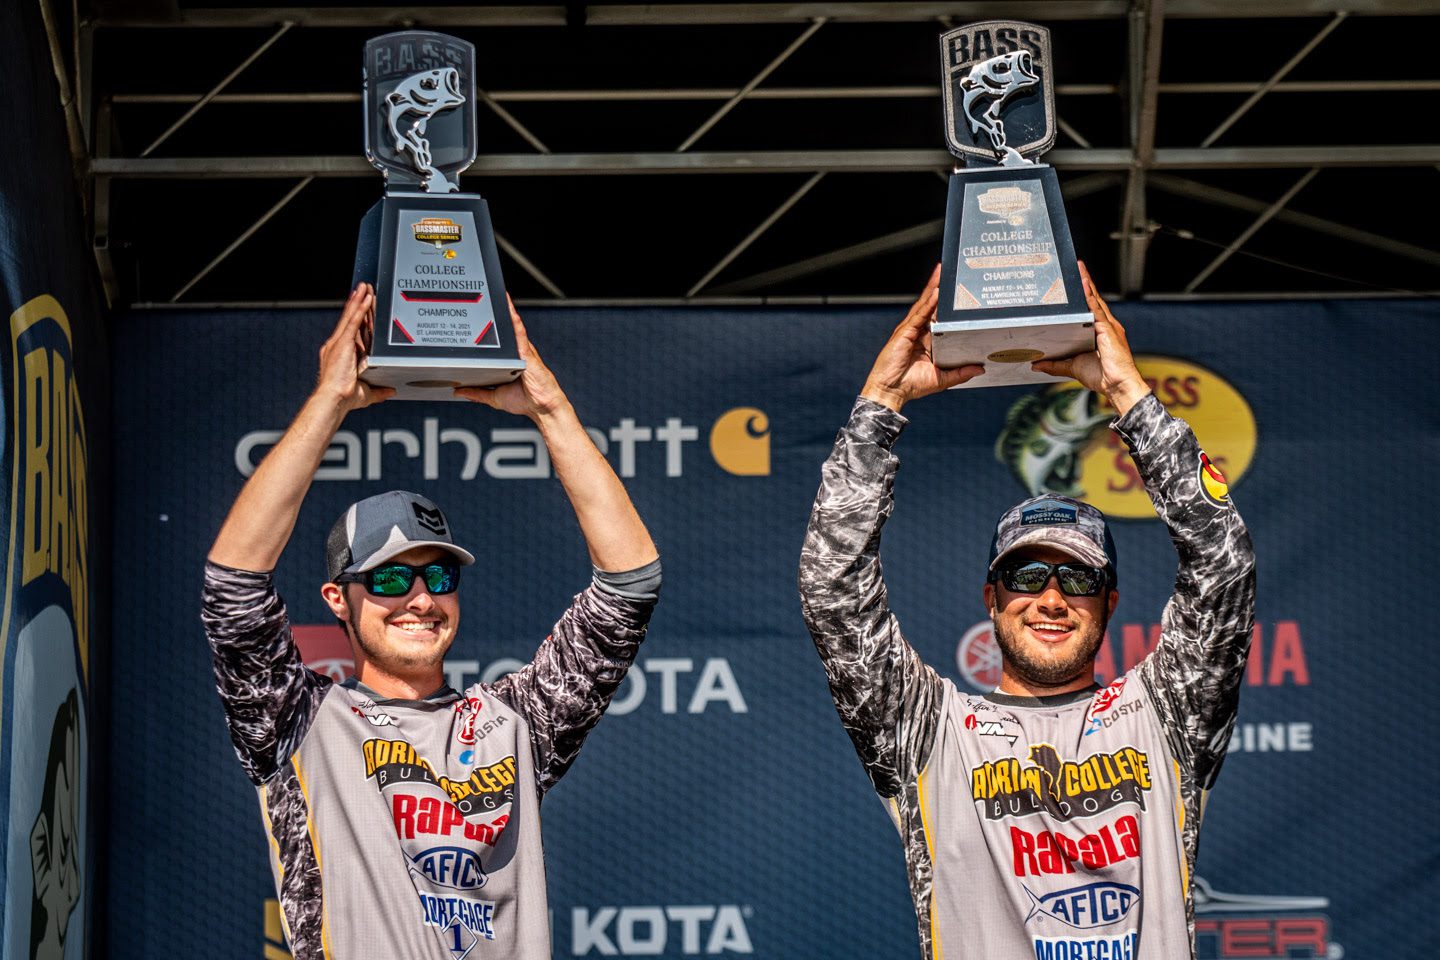 Adrian Wins Bassmaster College Series National Championship On St. Lawrence River